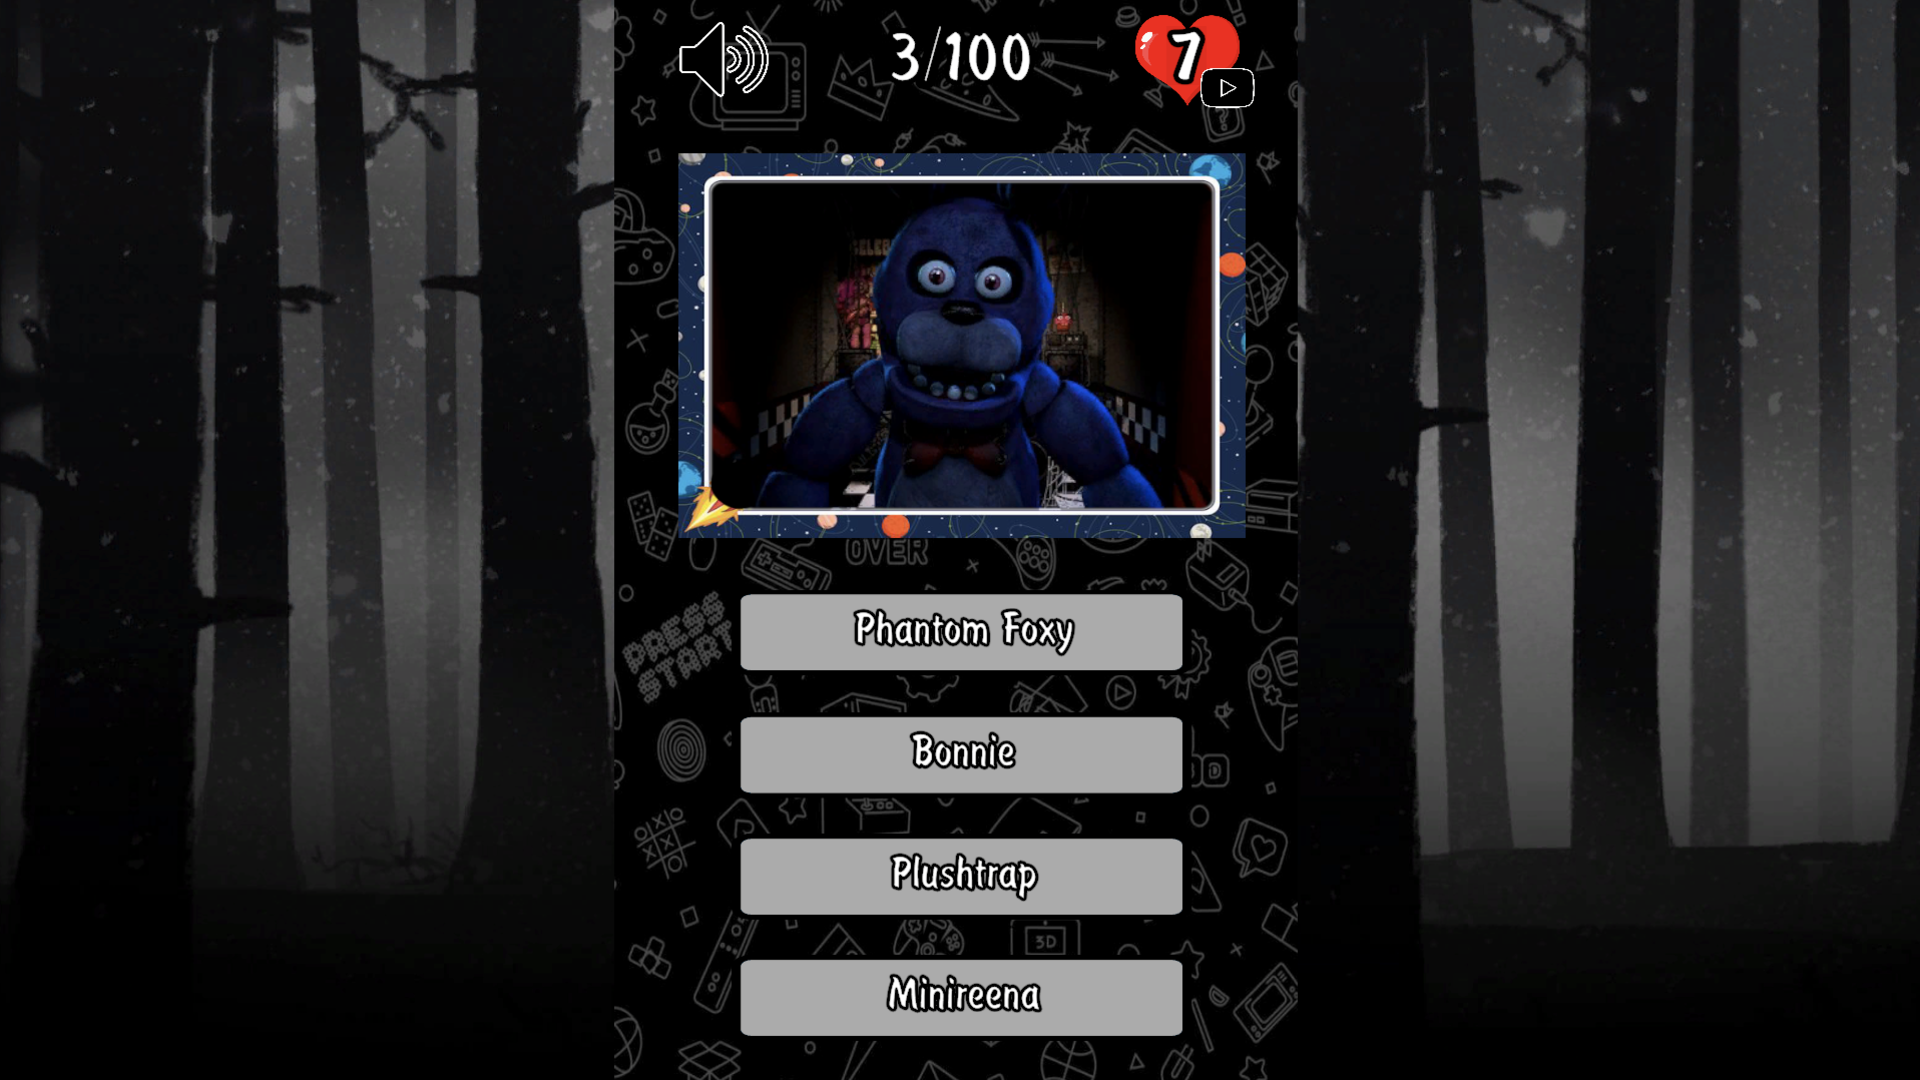 Five Nights at Freddy's 4 — play online for free on Yandex Games